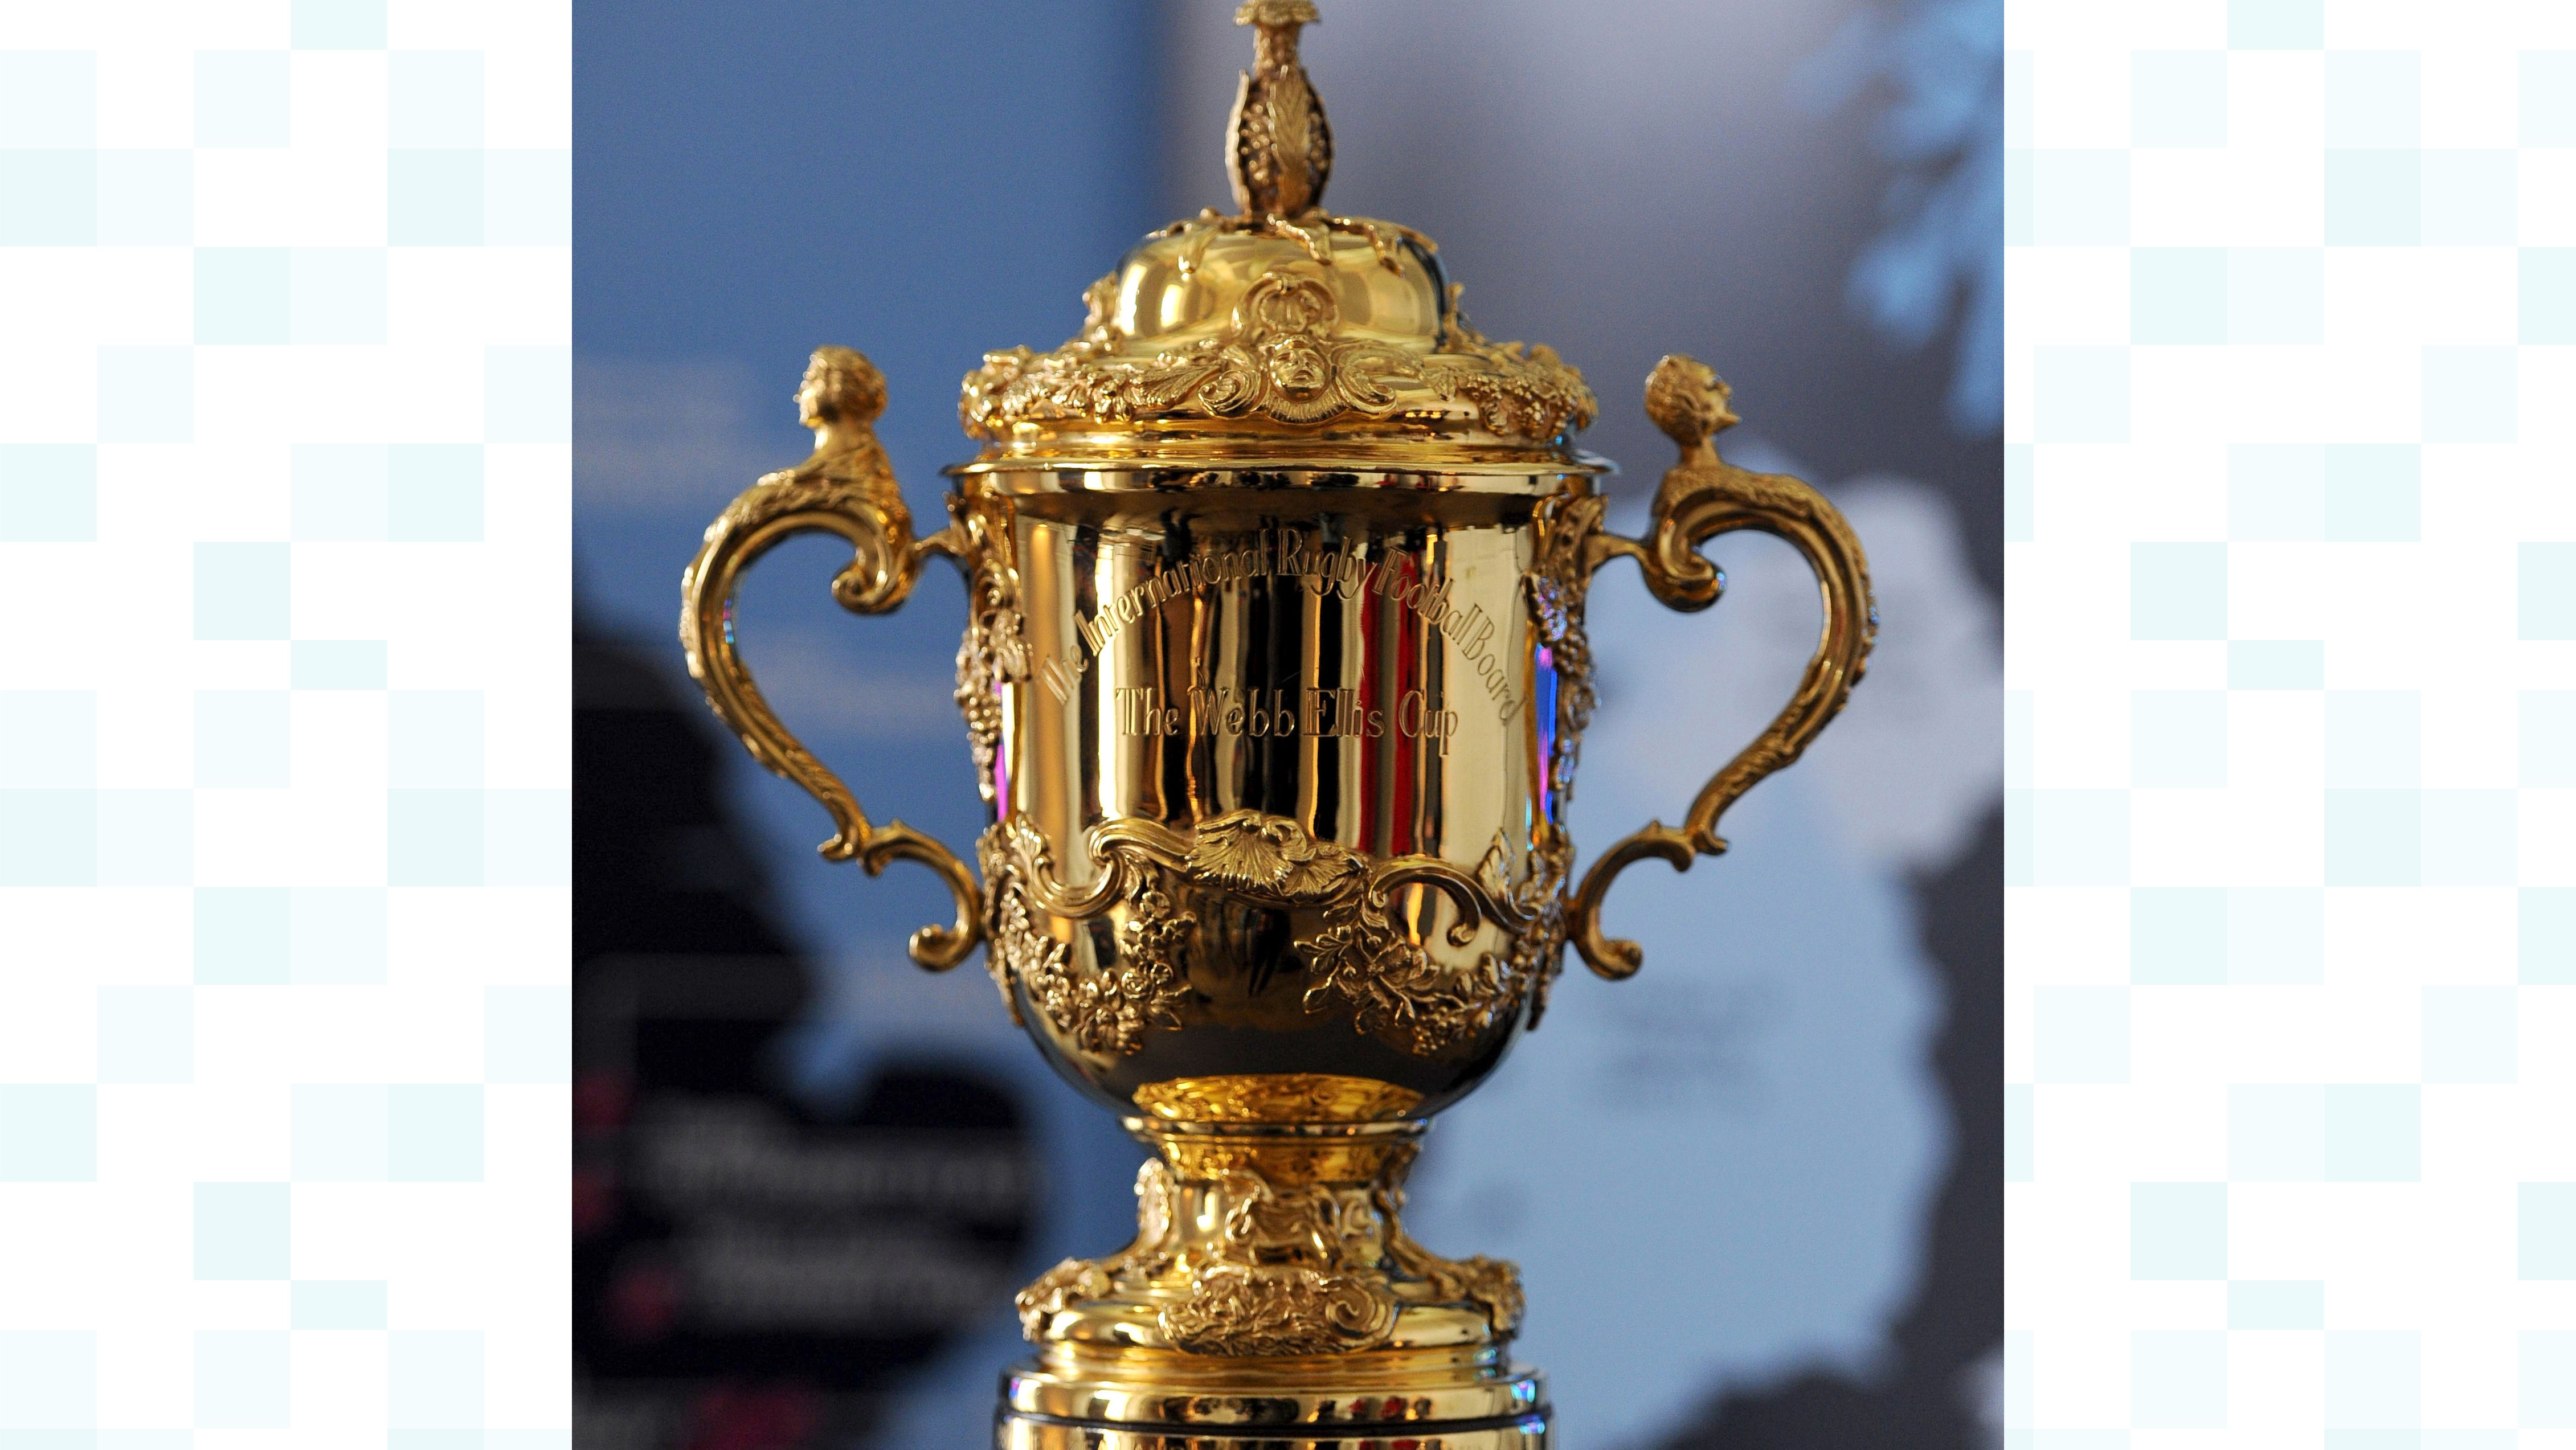 Rugby World Cup Trophy Images